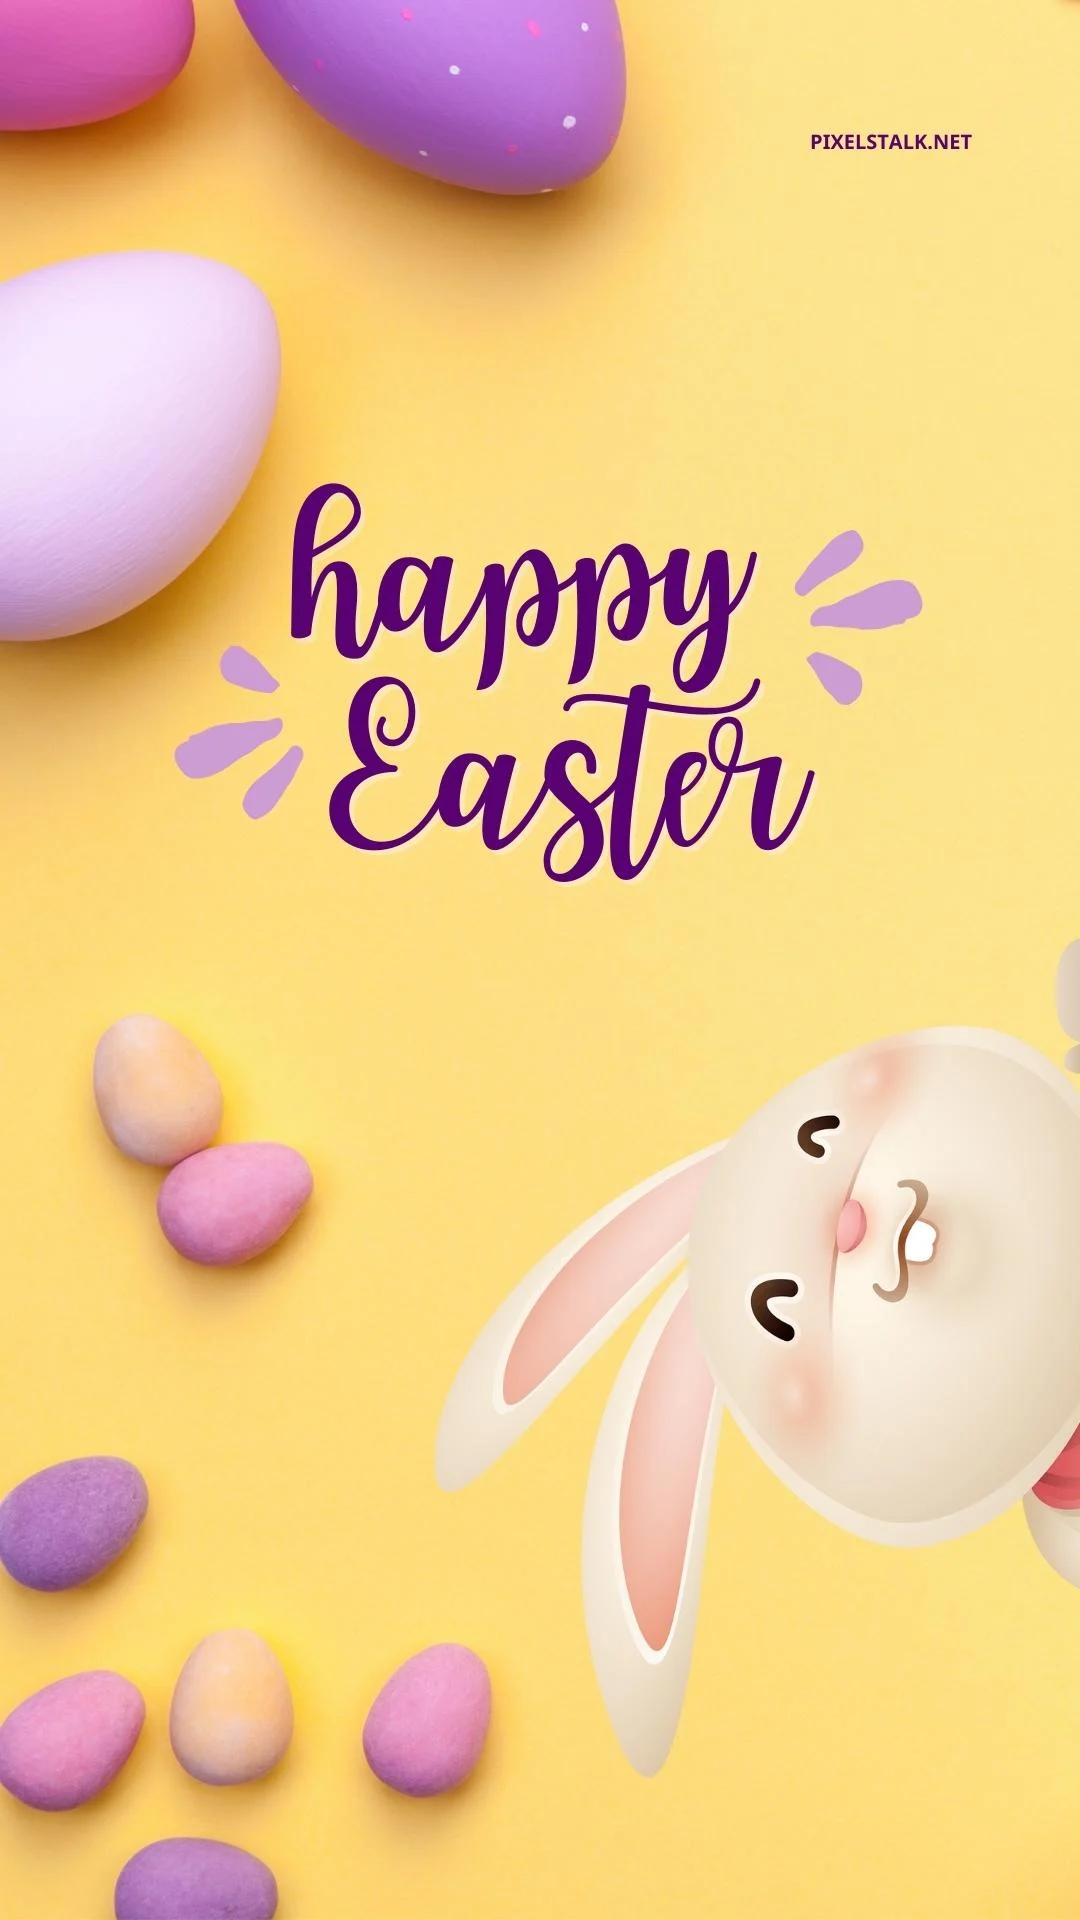 Easter wallpaper for mobile phone, with a cute bunny and colorful eggs - Easter